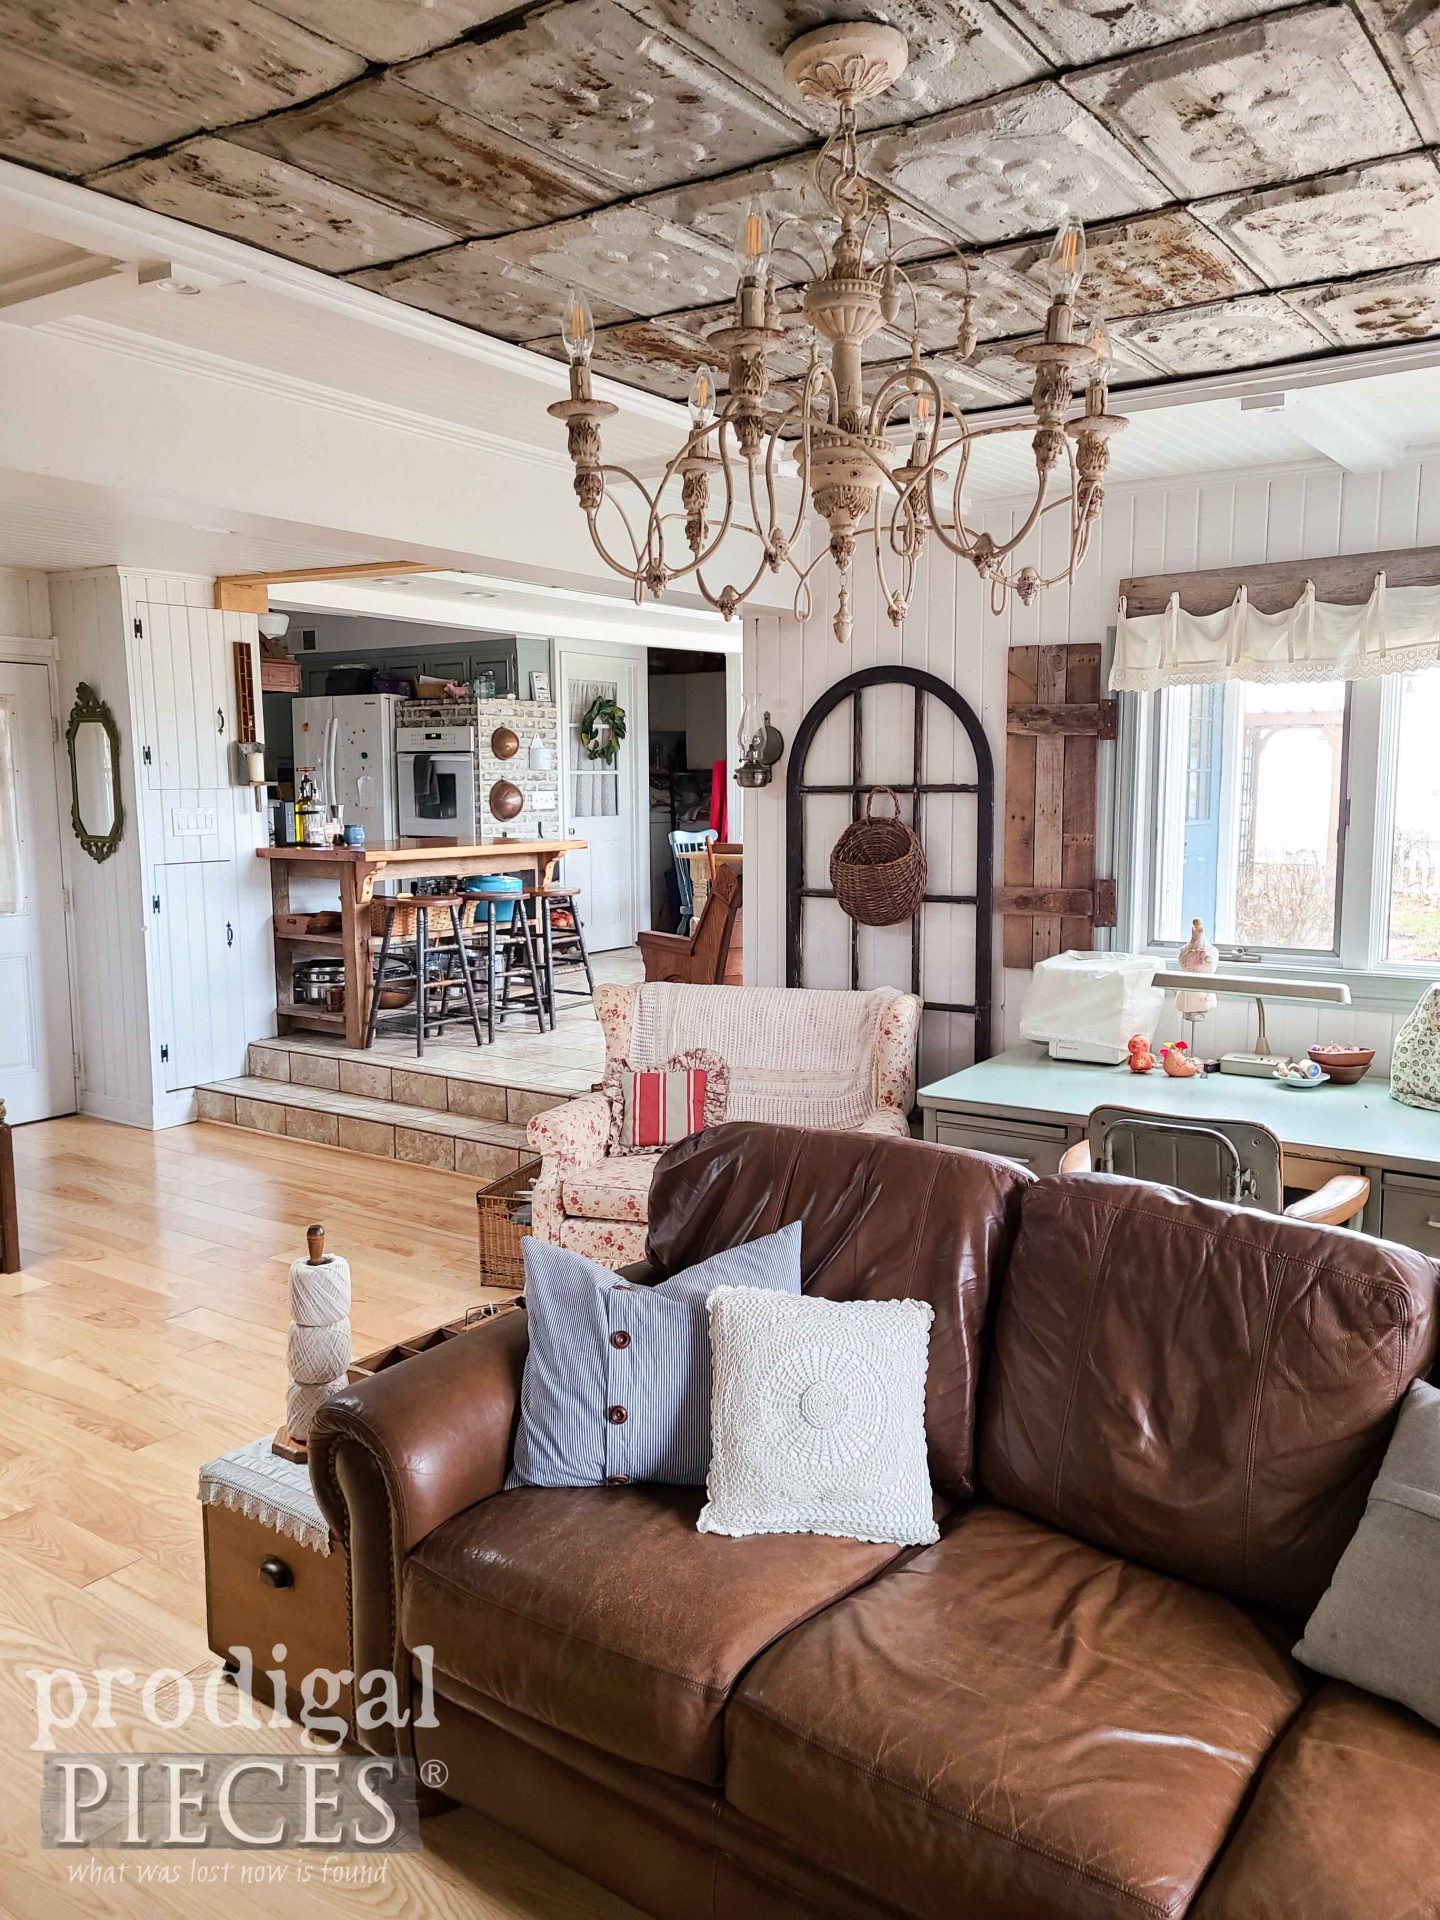 Reclaimed Ceiling Chandelier for DIY Family Room Remodel by Larissa & JC of Prodigal Pieces | prodigalpieces.com #prodigalpieces #home #homedecor #diy #remodel